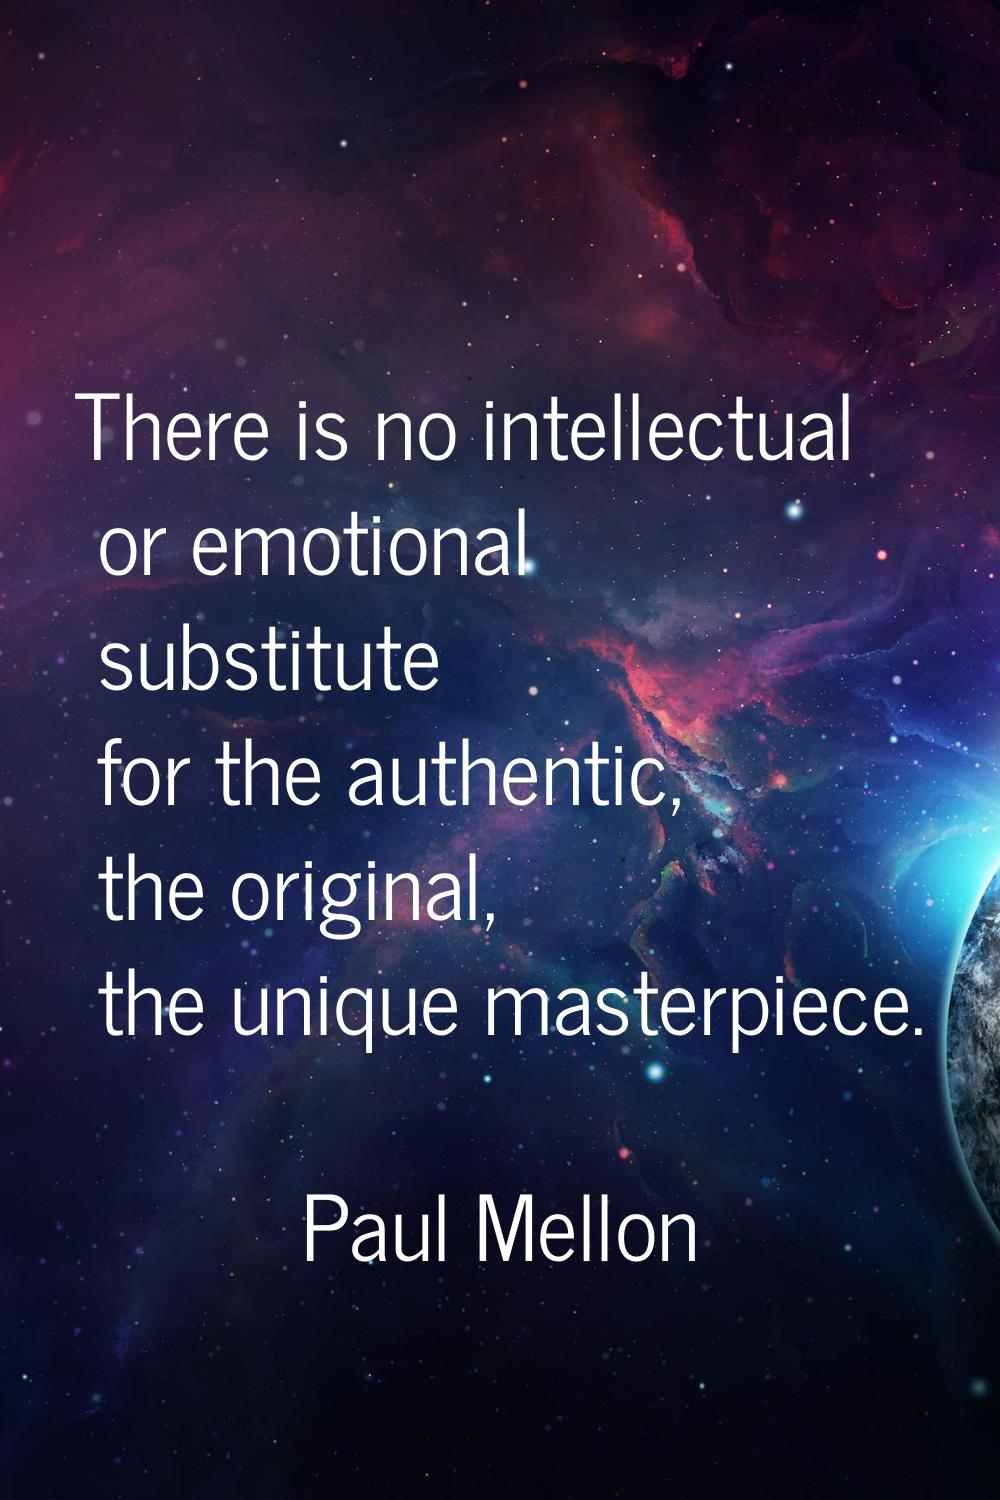 There is no intellectual or emotional substitute for the authentic, the original, the unique master